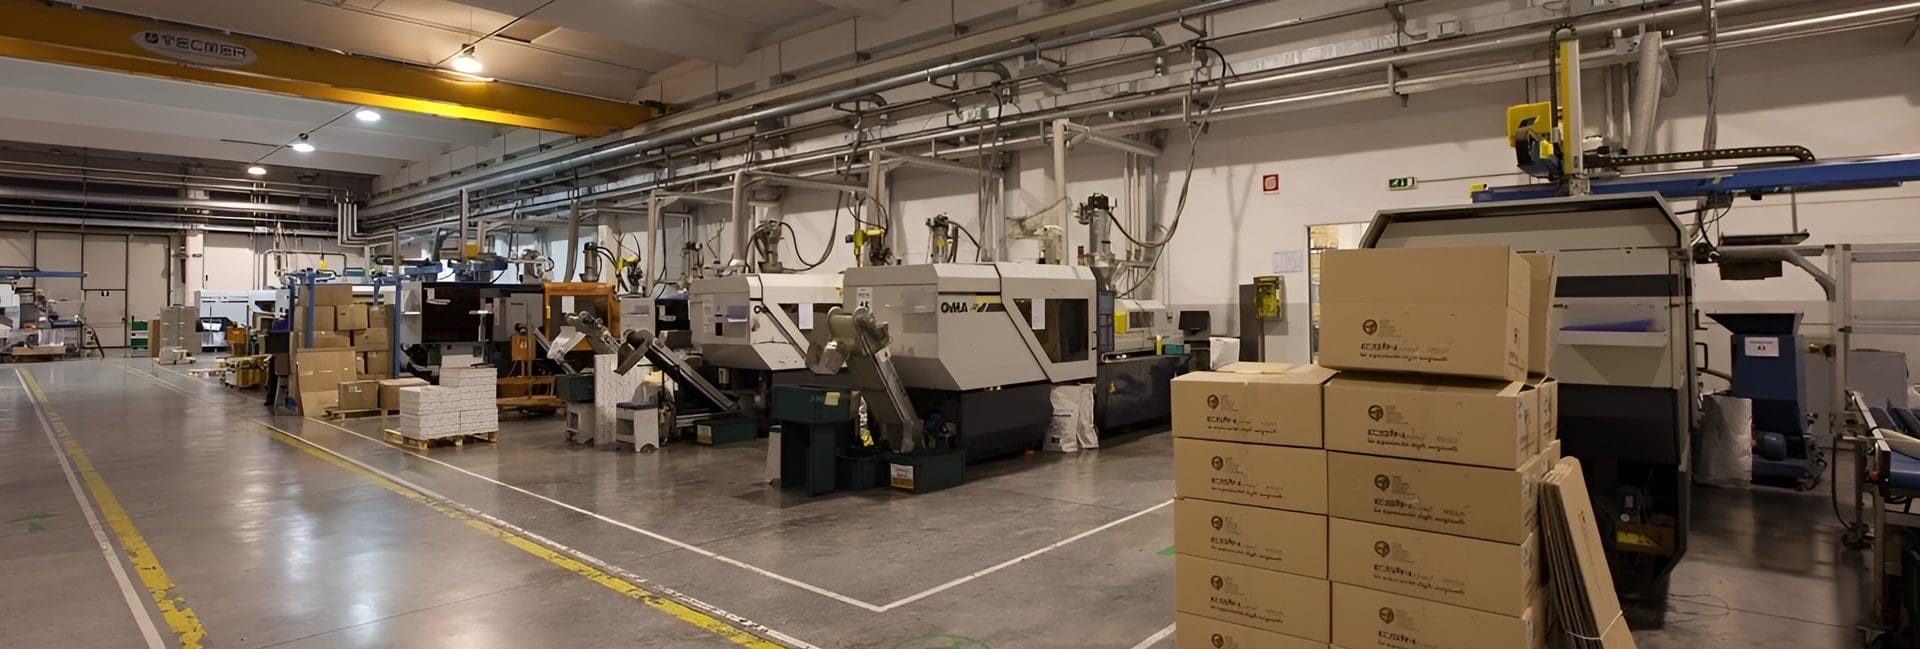 A factory with machines and boxes on the floor.